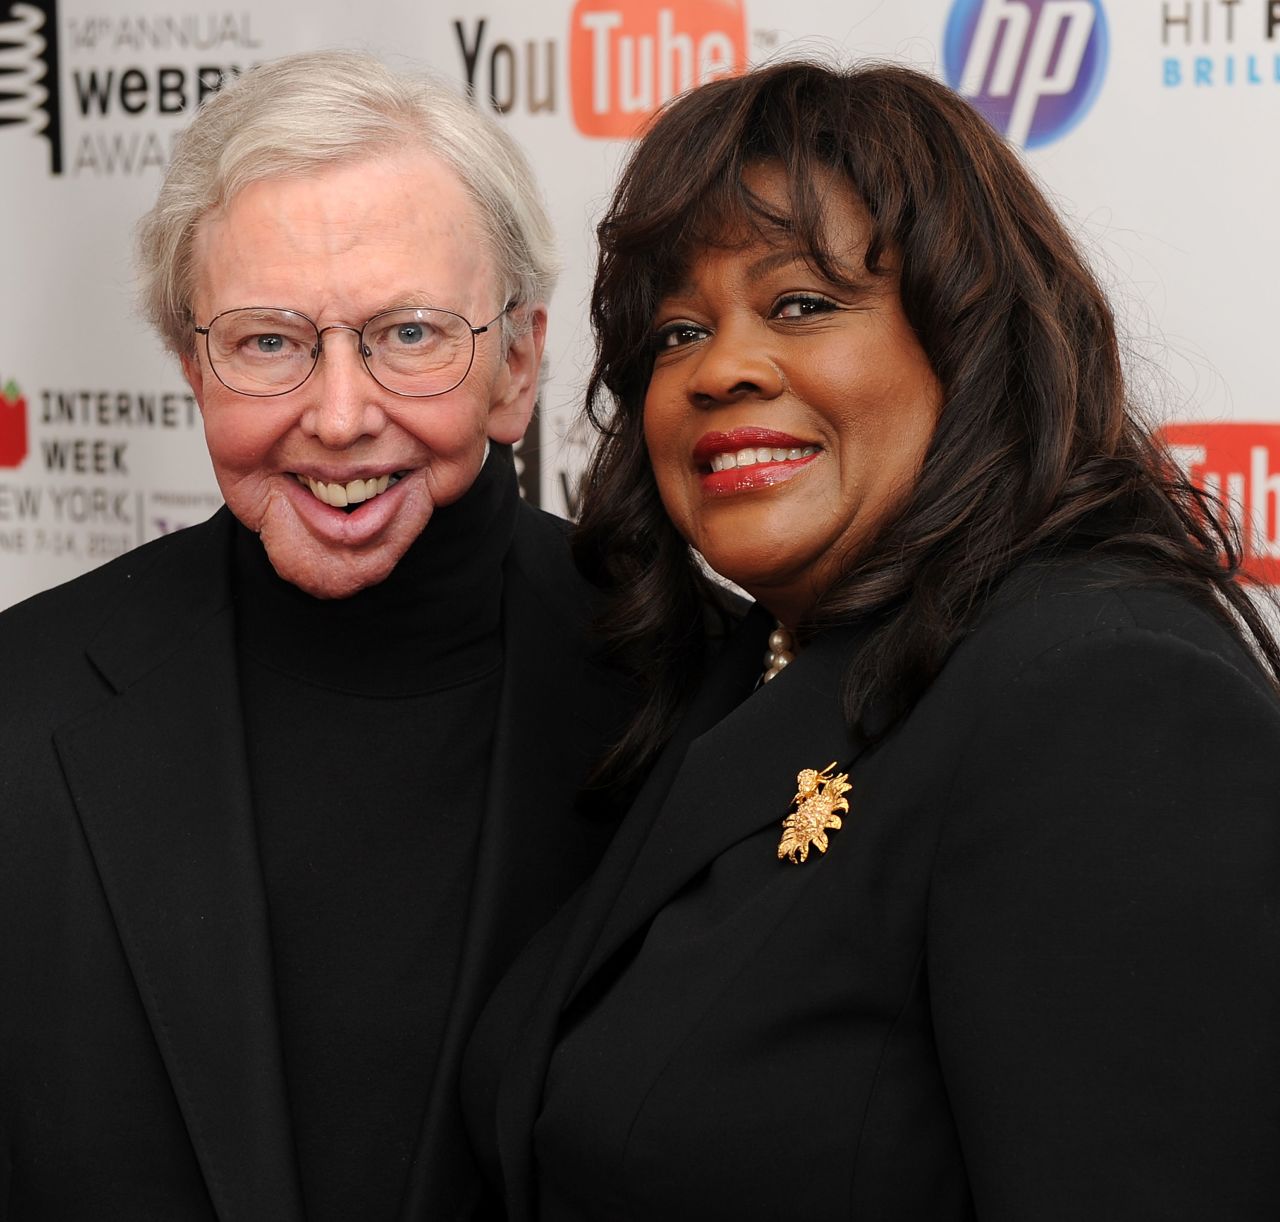 Ebert and his wife, Chaz Ebert, attend the 14th Annual Webby Awards on June 14, 2010, in New York.